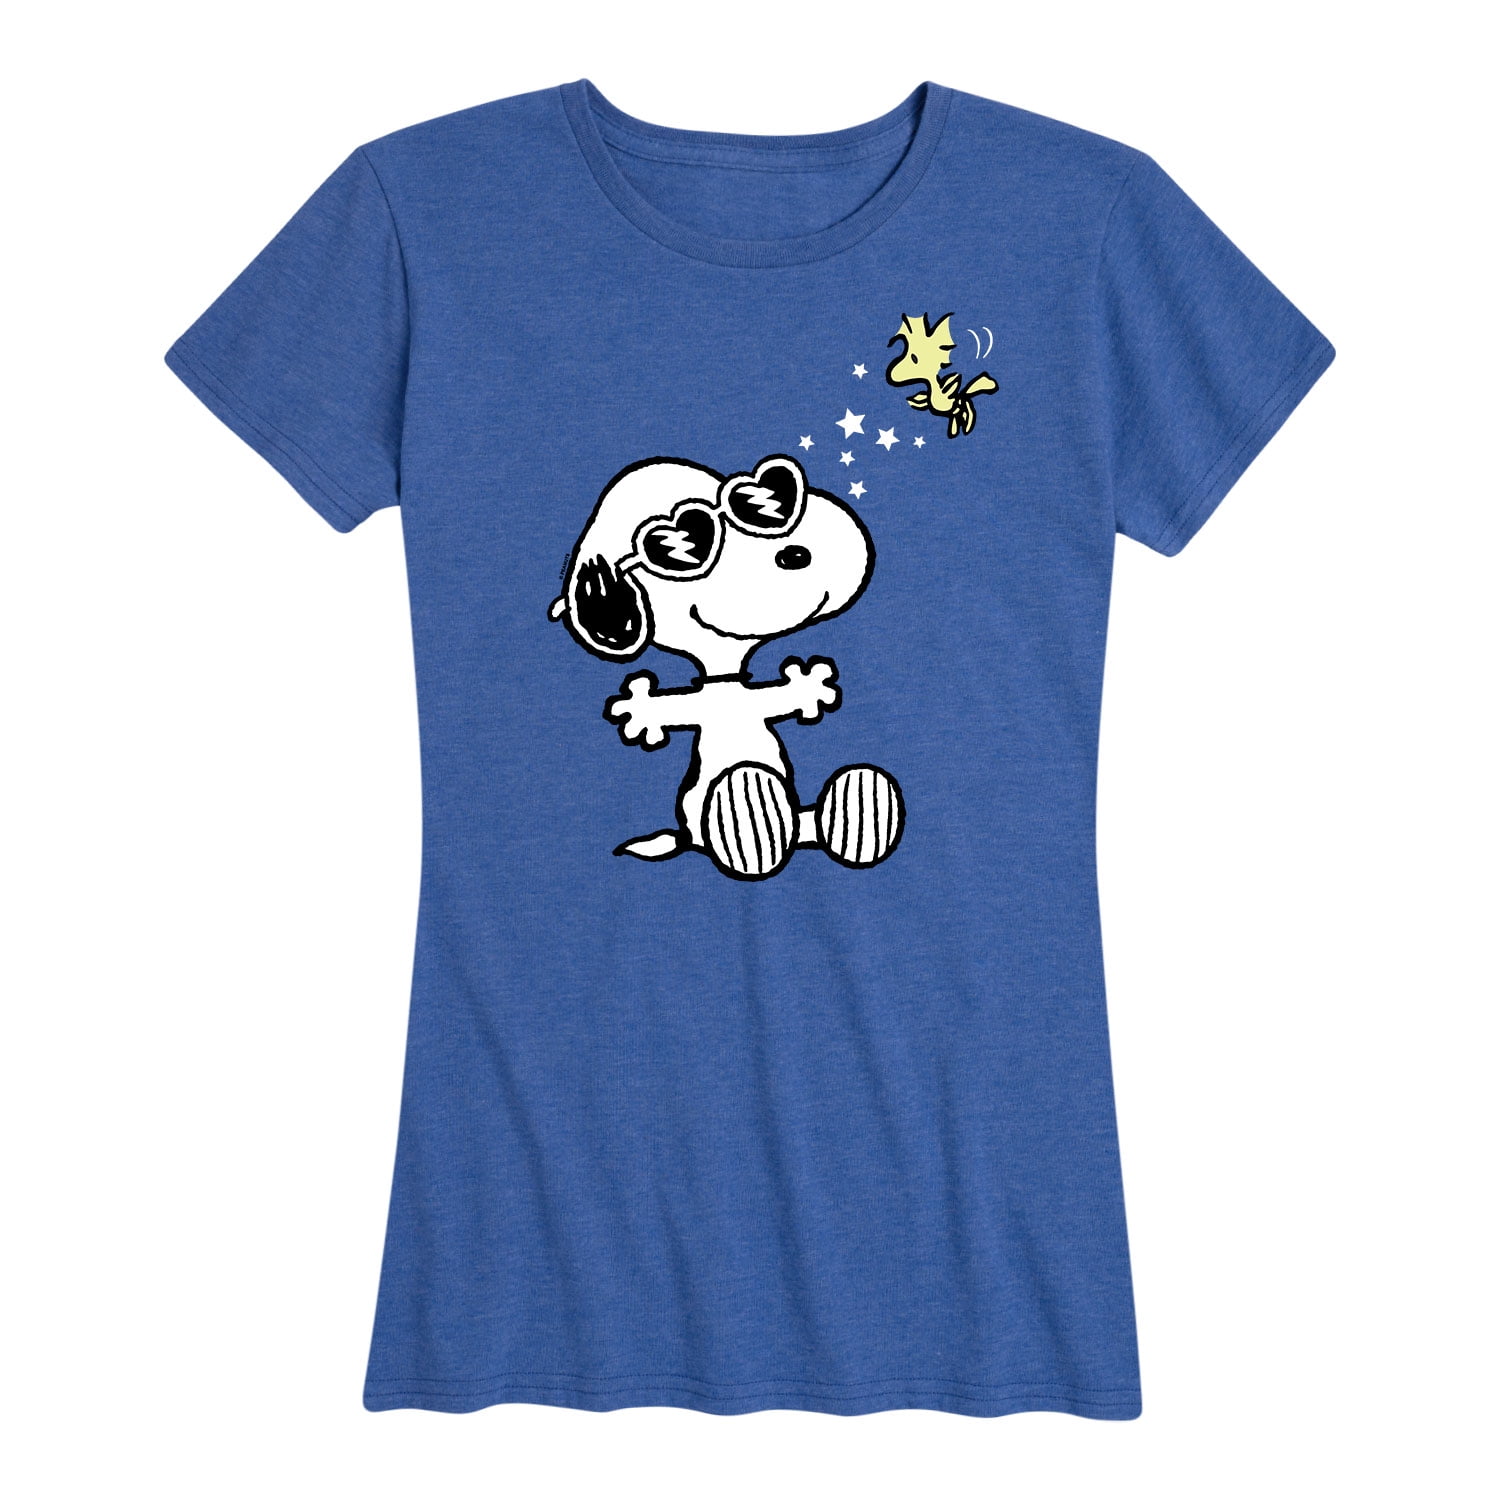 Peanuts - Faces of Snoopy - Women's Short Sleeve Graphic T-Shirt